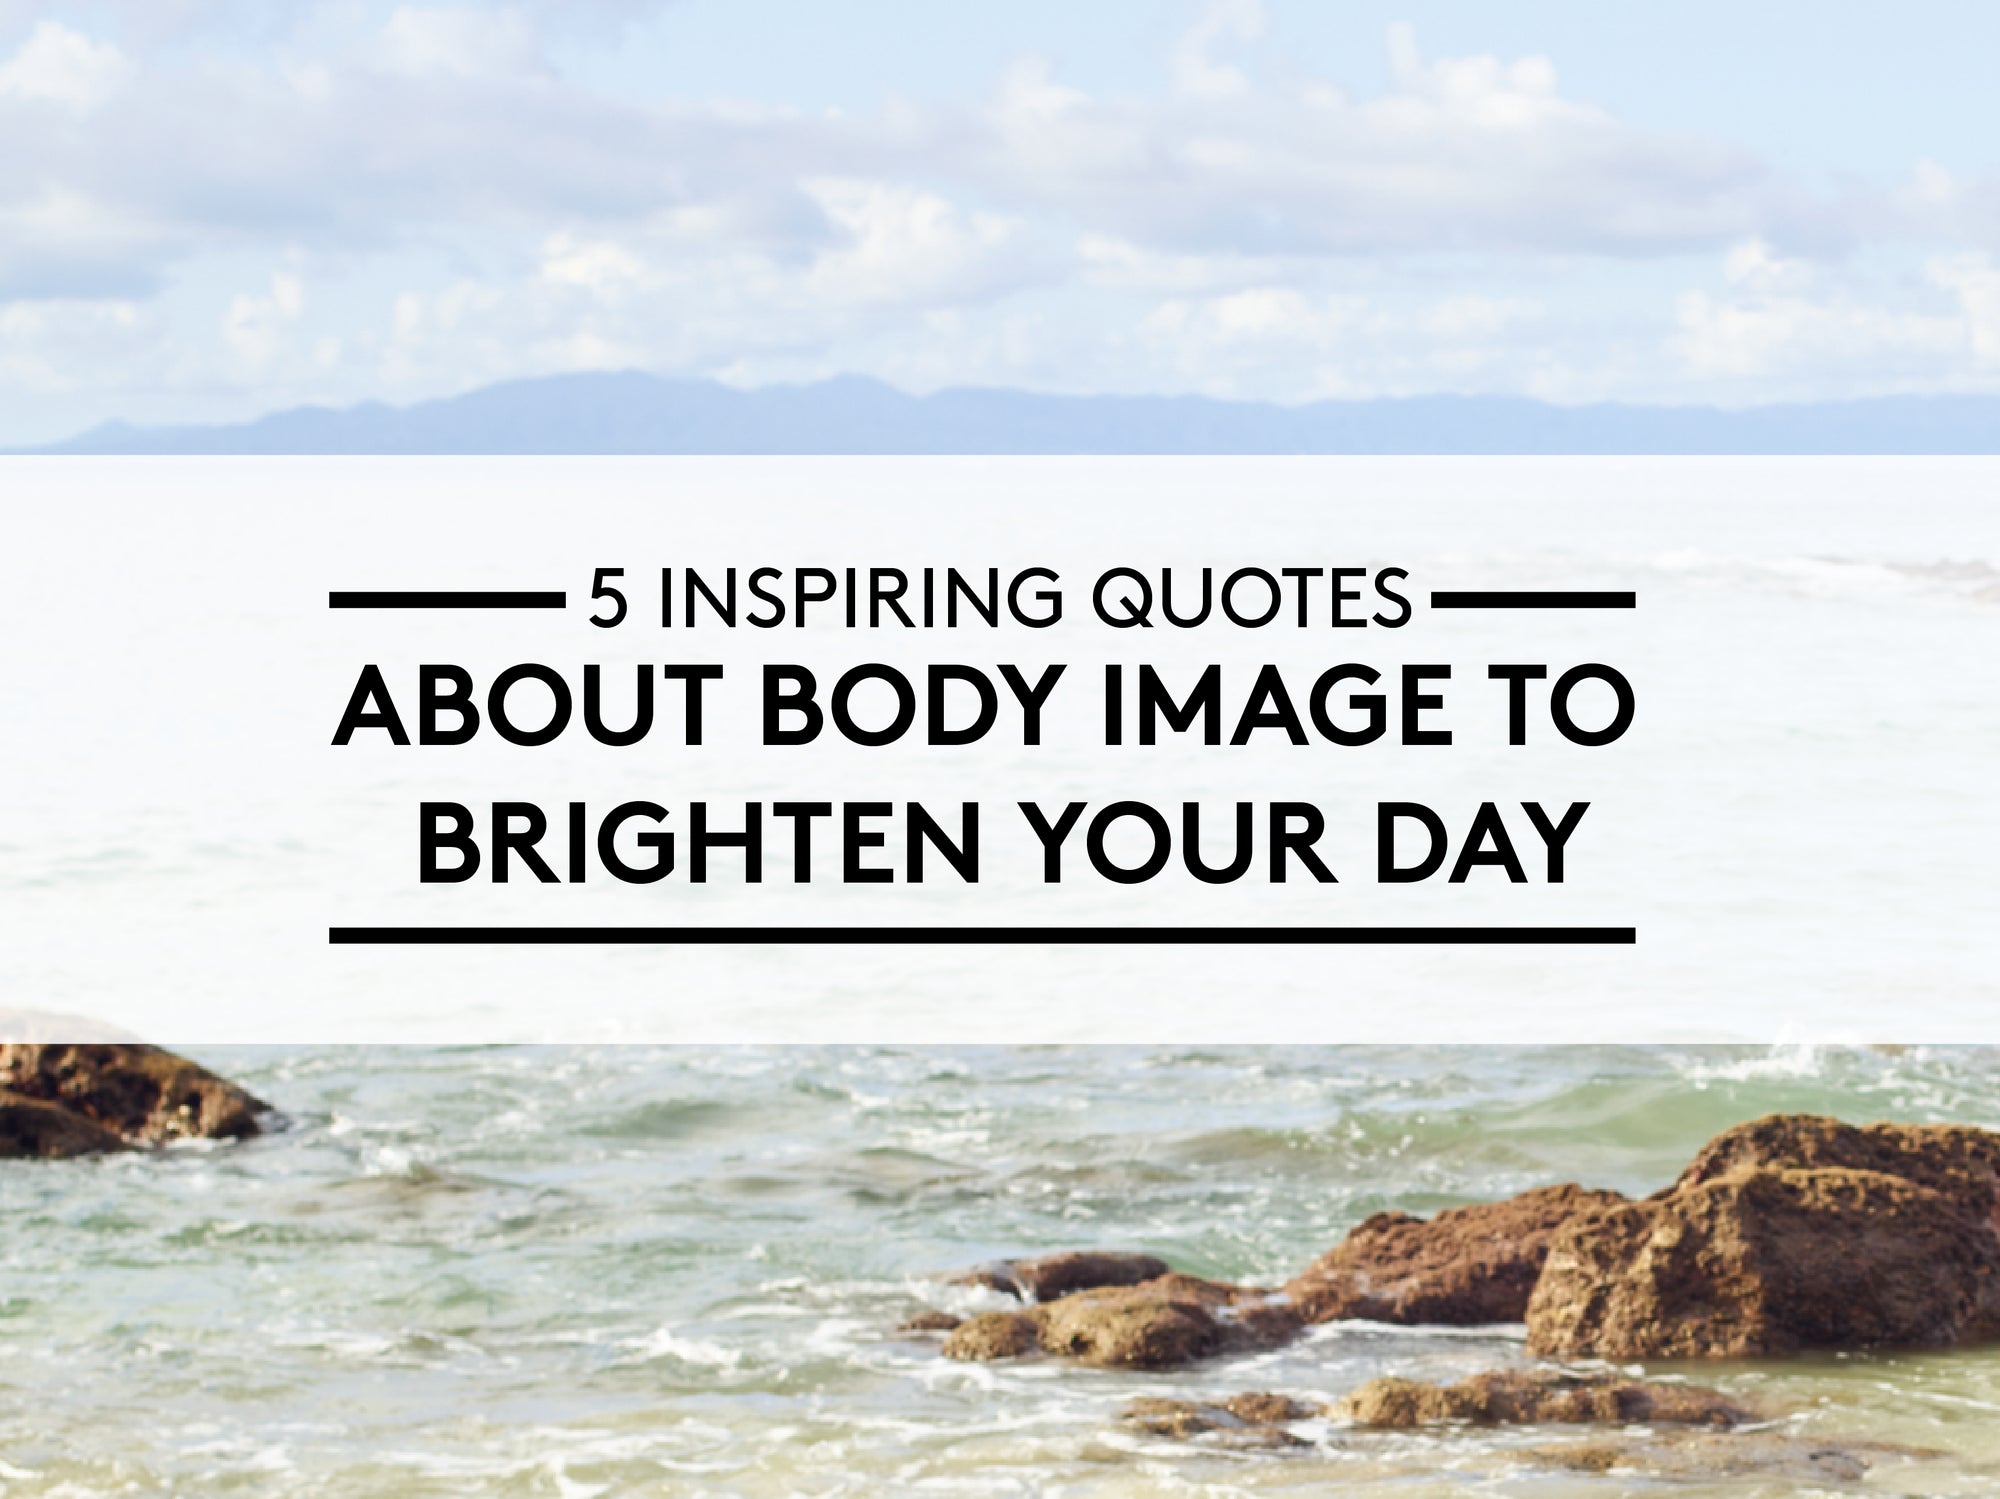 5 Inspiring Quotes About Body Image to Brighten Your Day